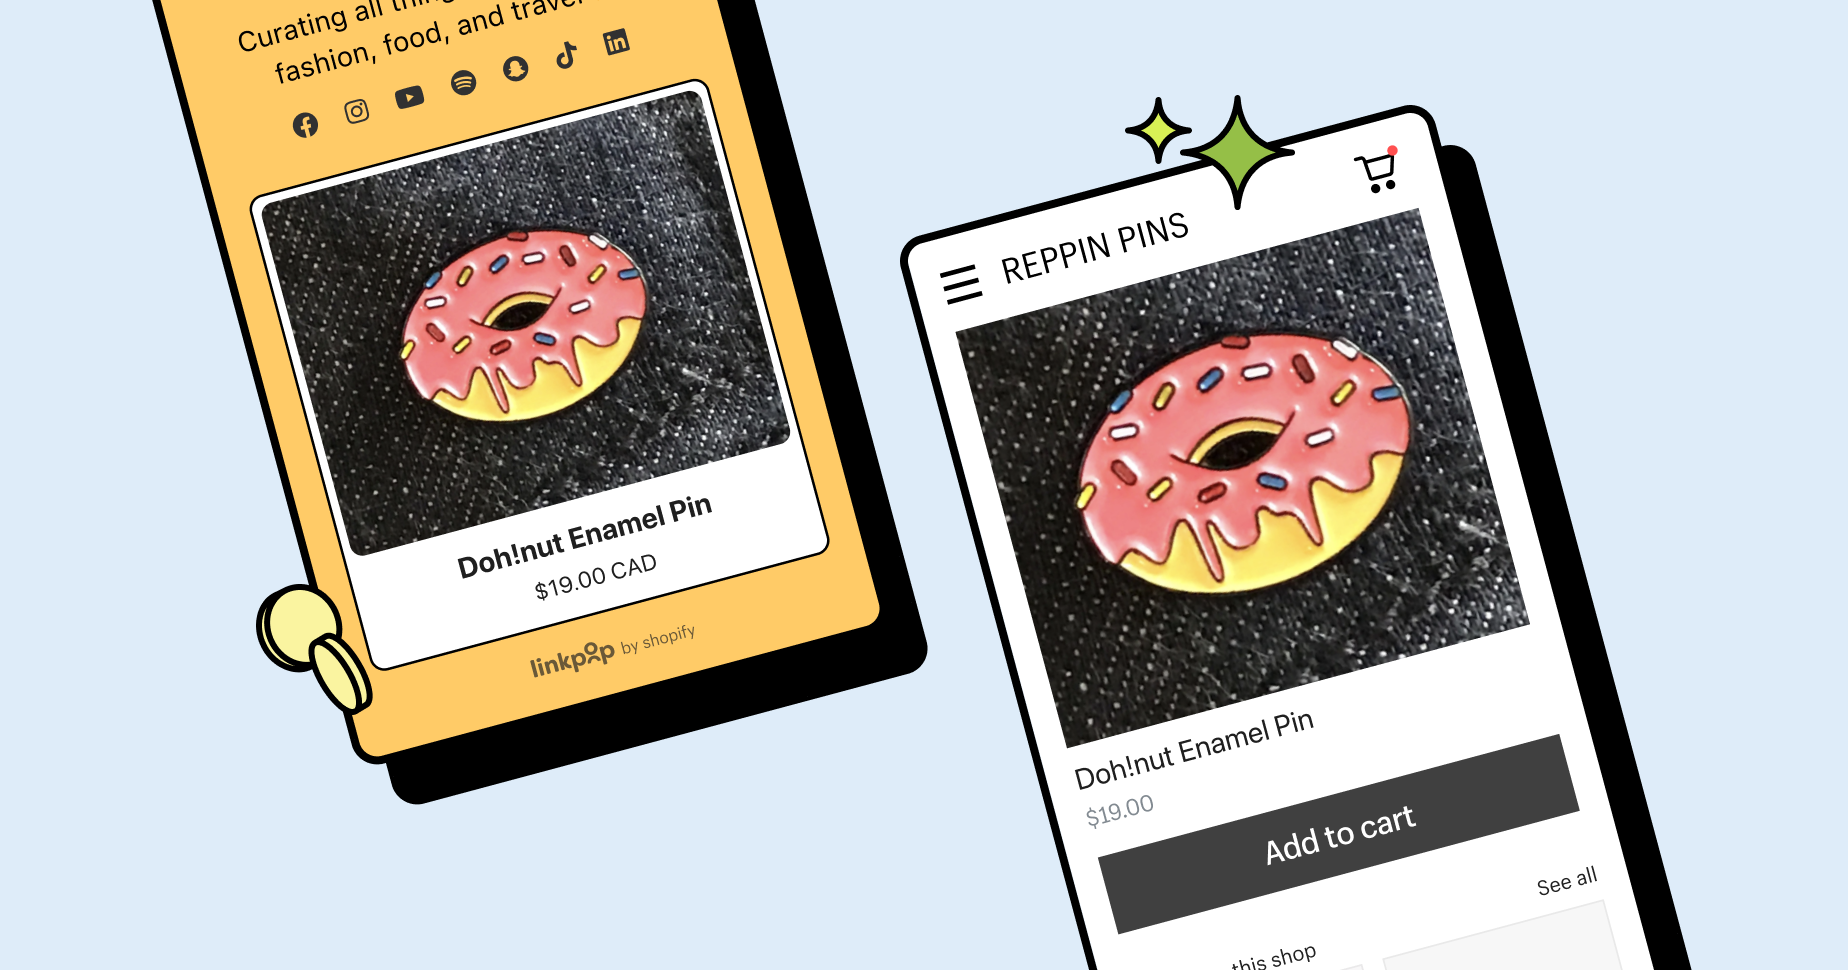 Image depicting interface of Linkpop shoppable link for an enamel pin of a donut as product.